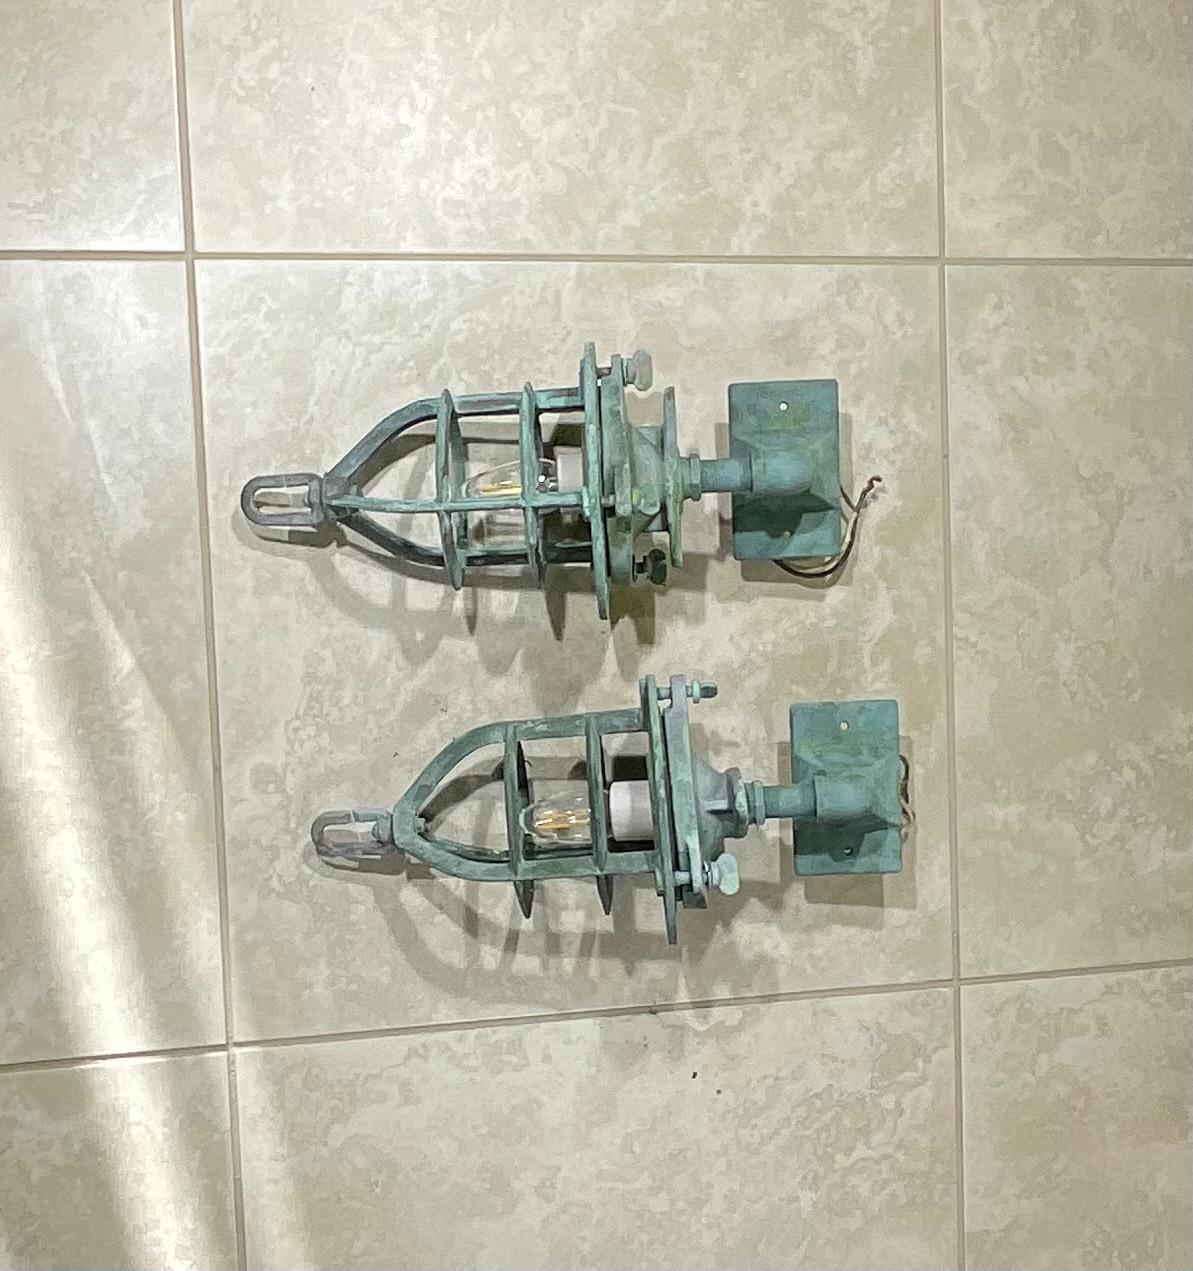 Pair Of Bronze Nautical Marine wall sconces, or Convoy Lights In Good Condition For Sale In Delray Beach, FL